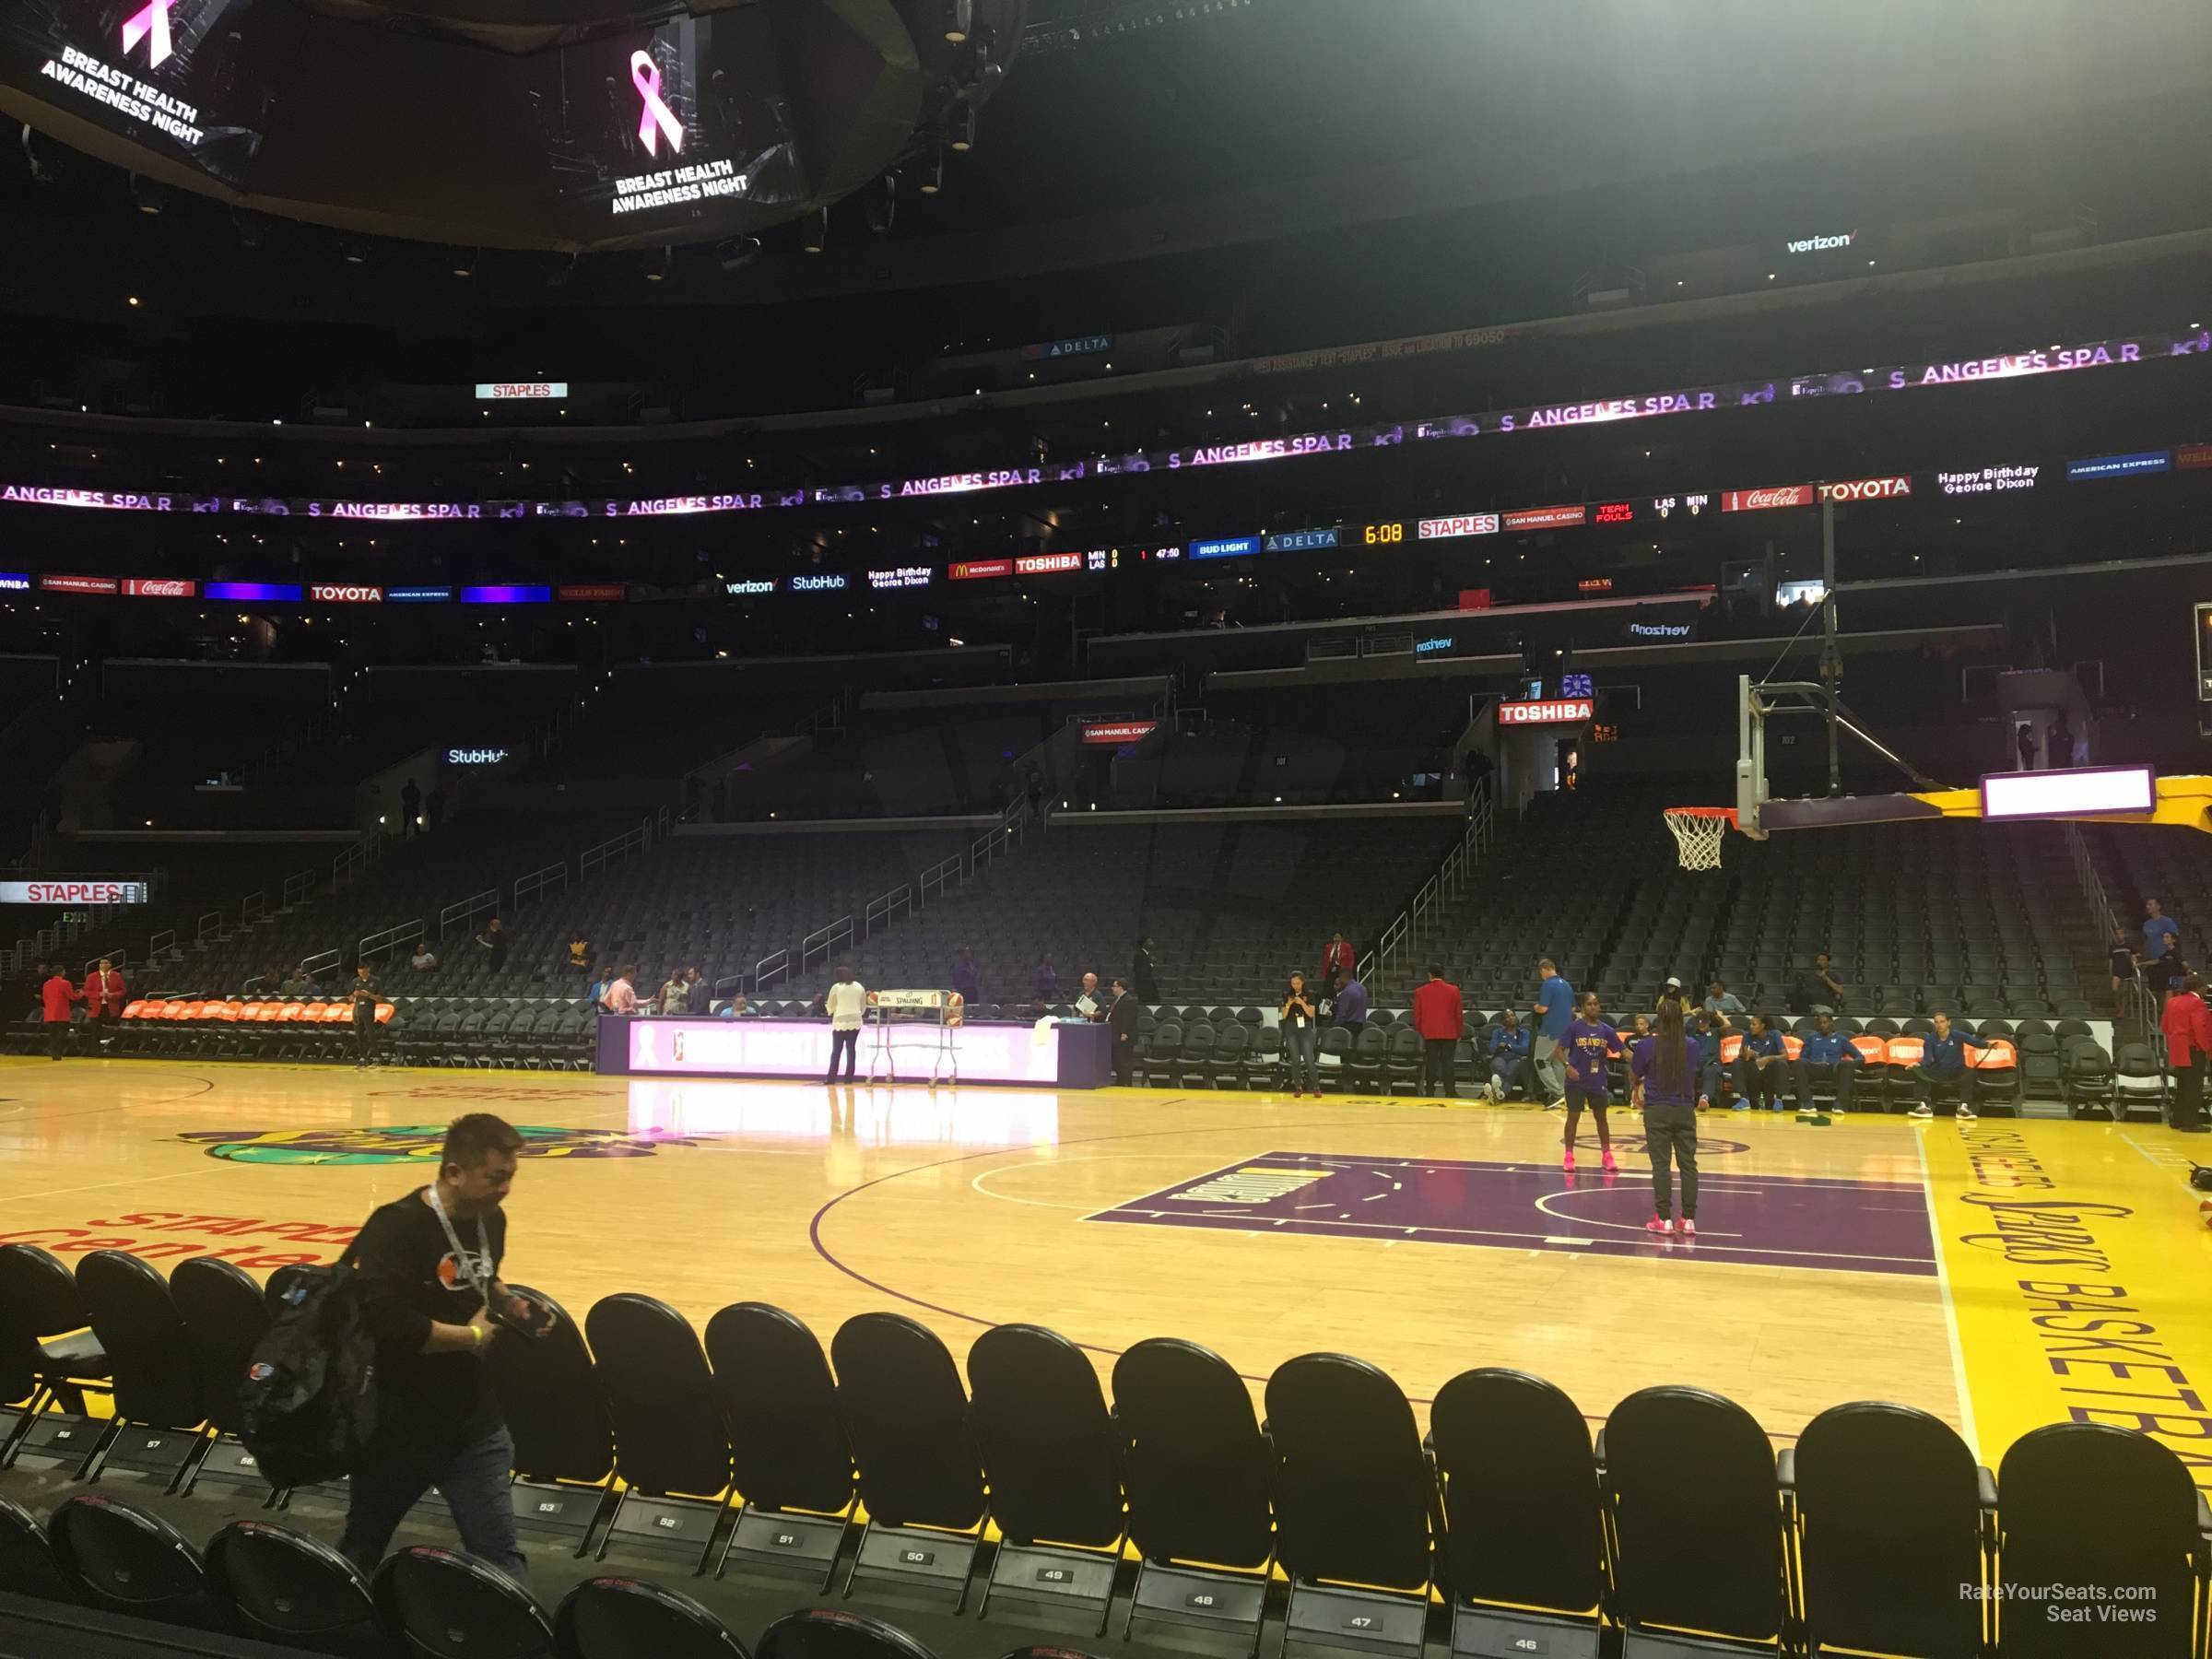 Clippers Seating Chart With Seat Numbers